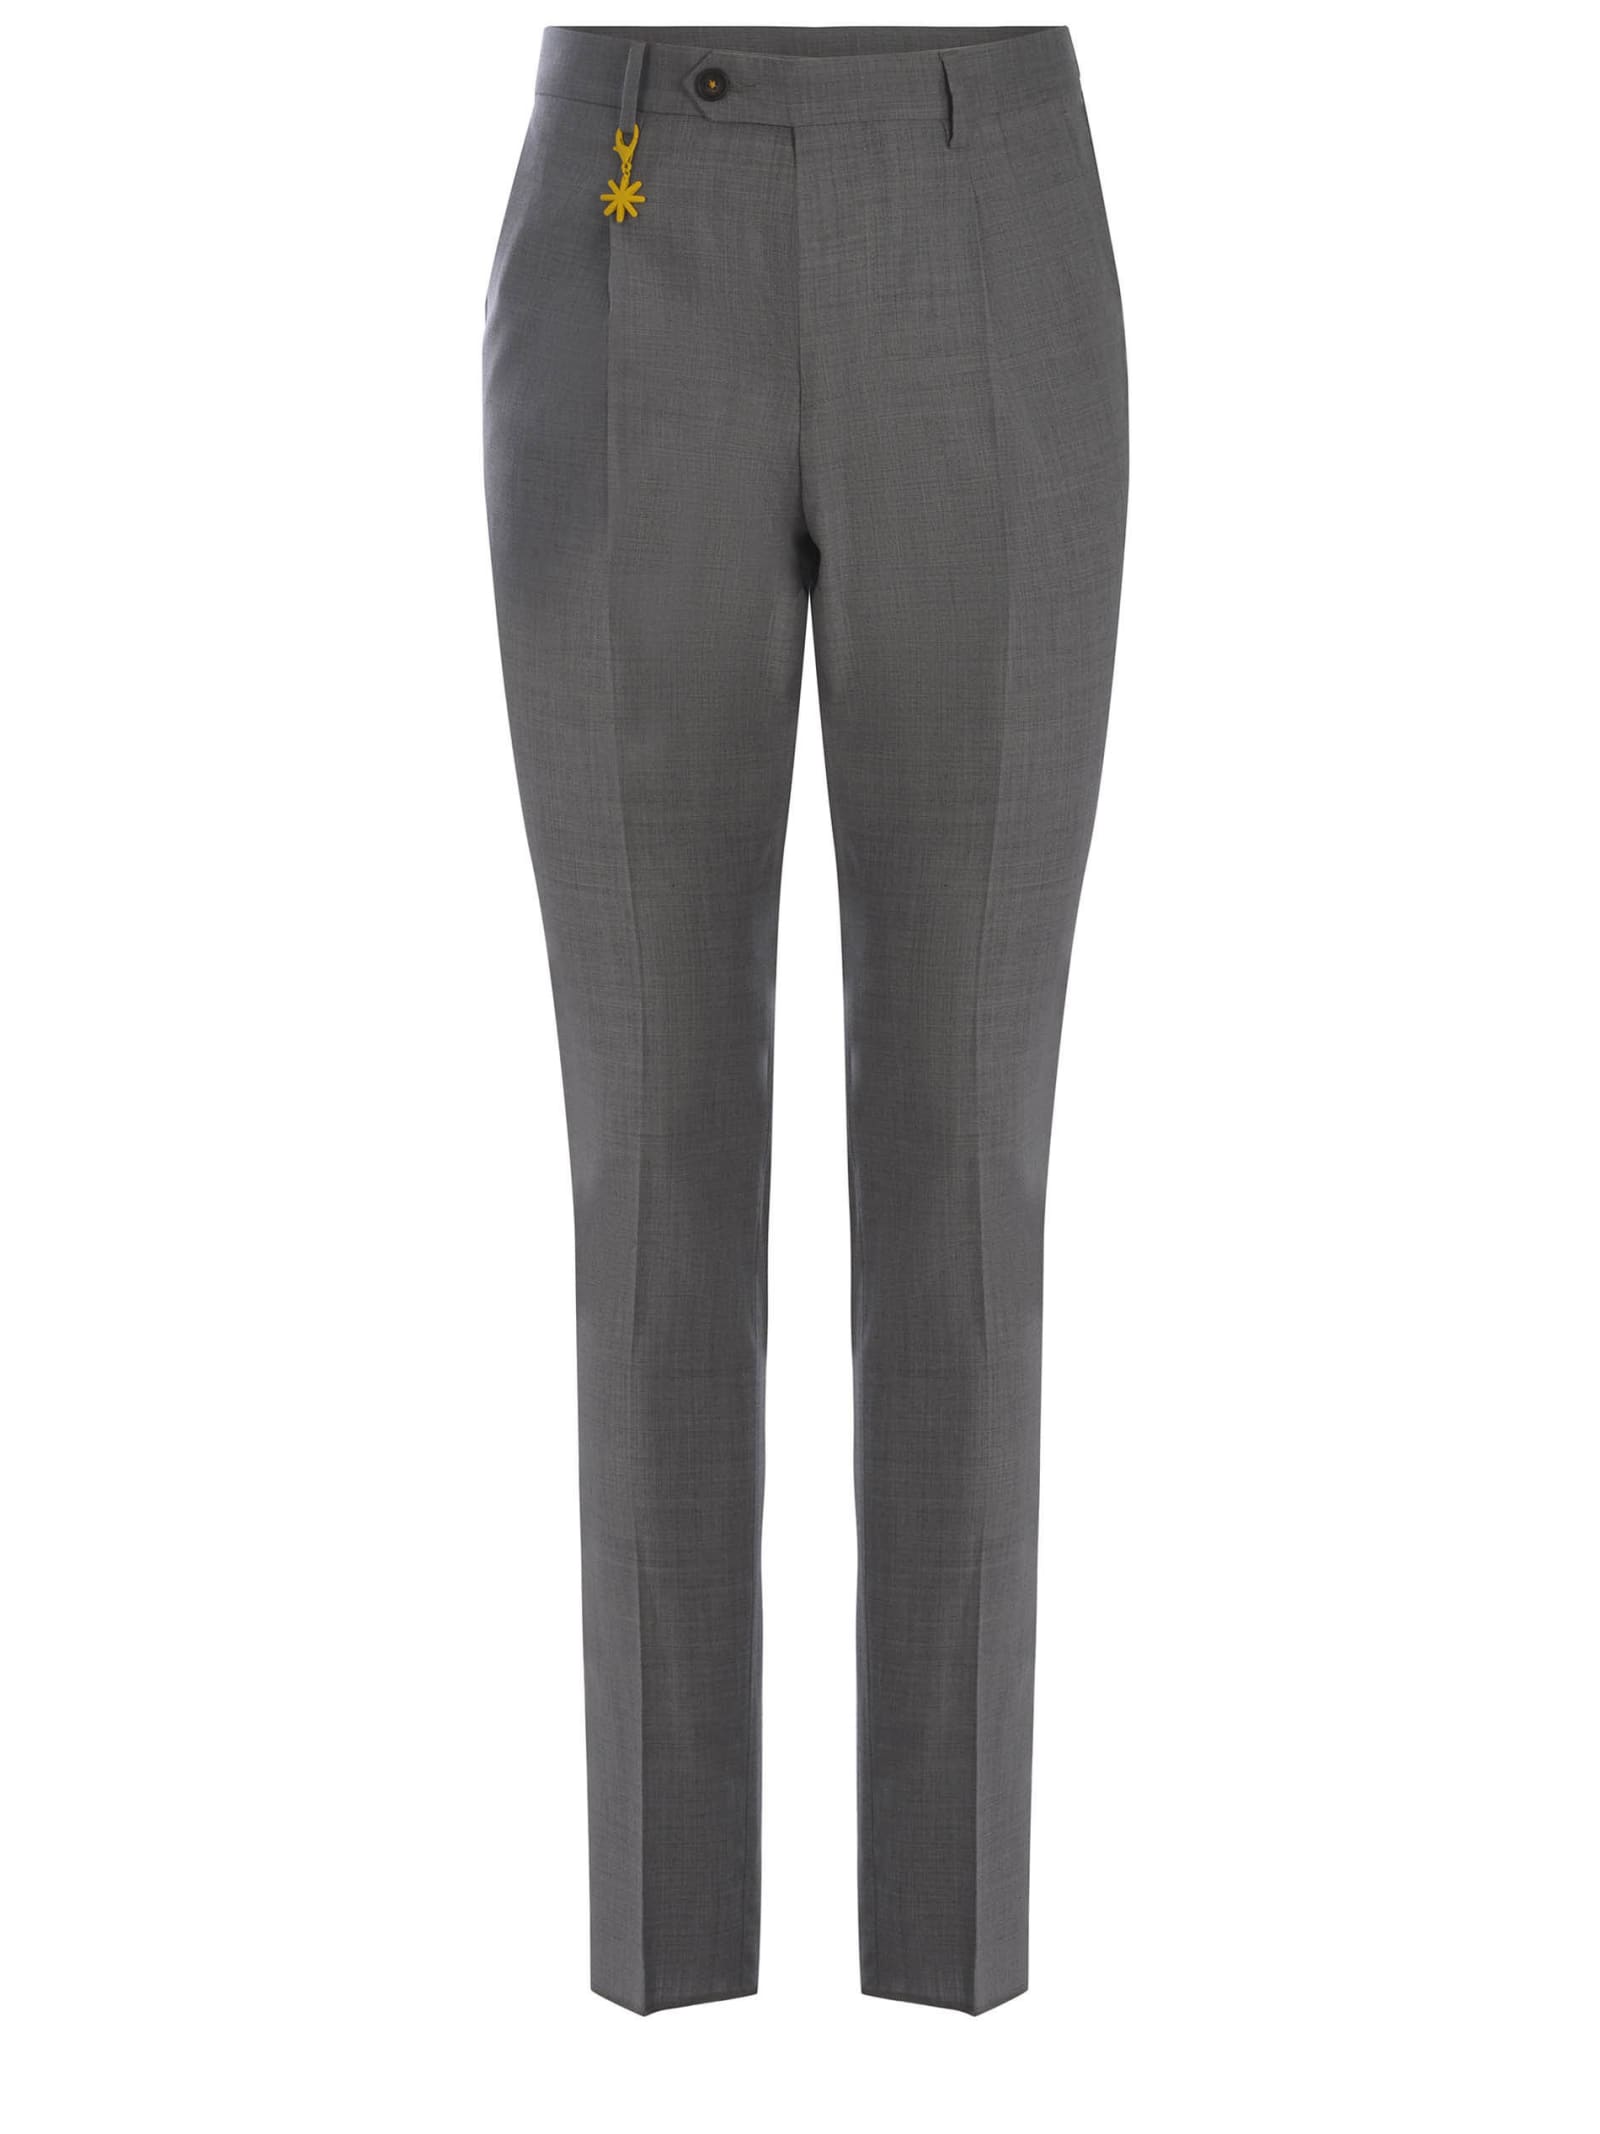 Shop Manuel Ritz Trousers  Made Of Wool Canvas In Grey